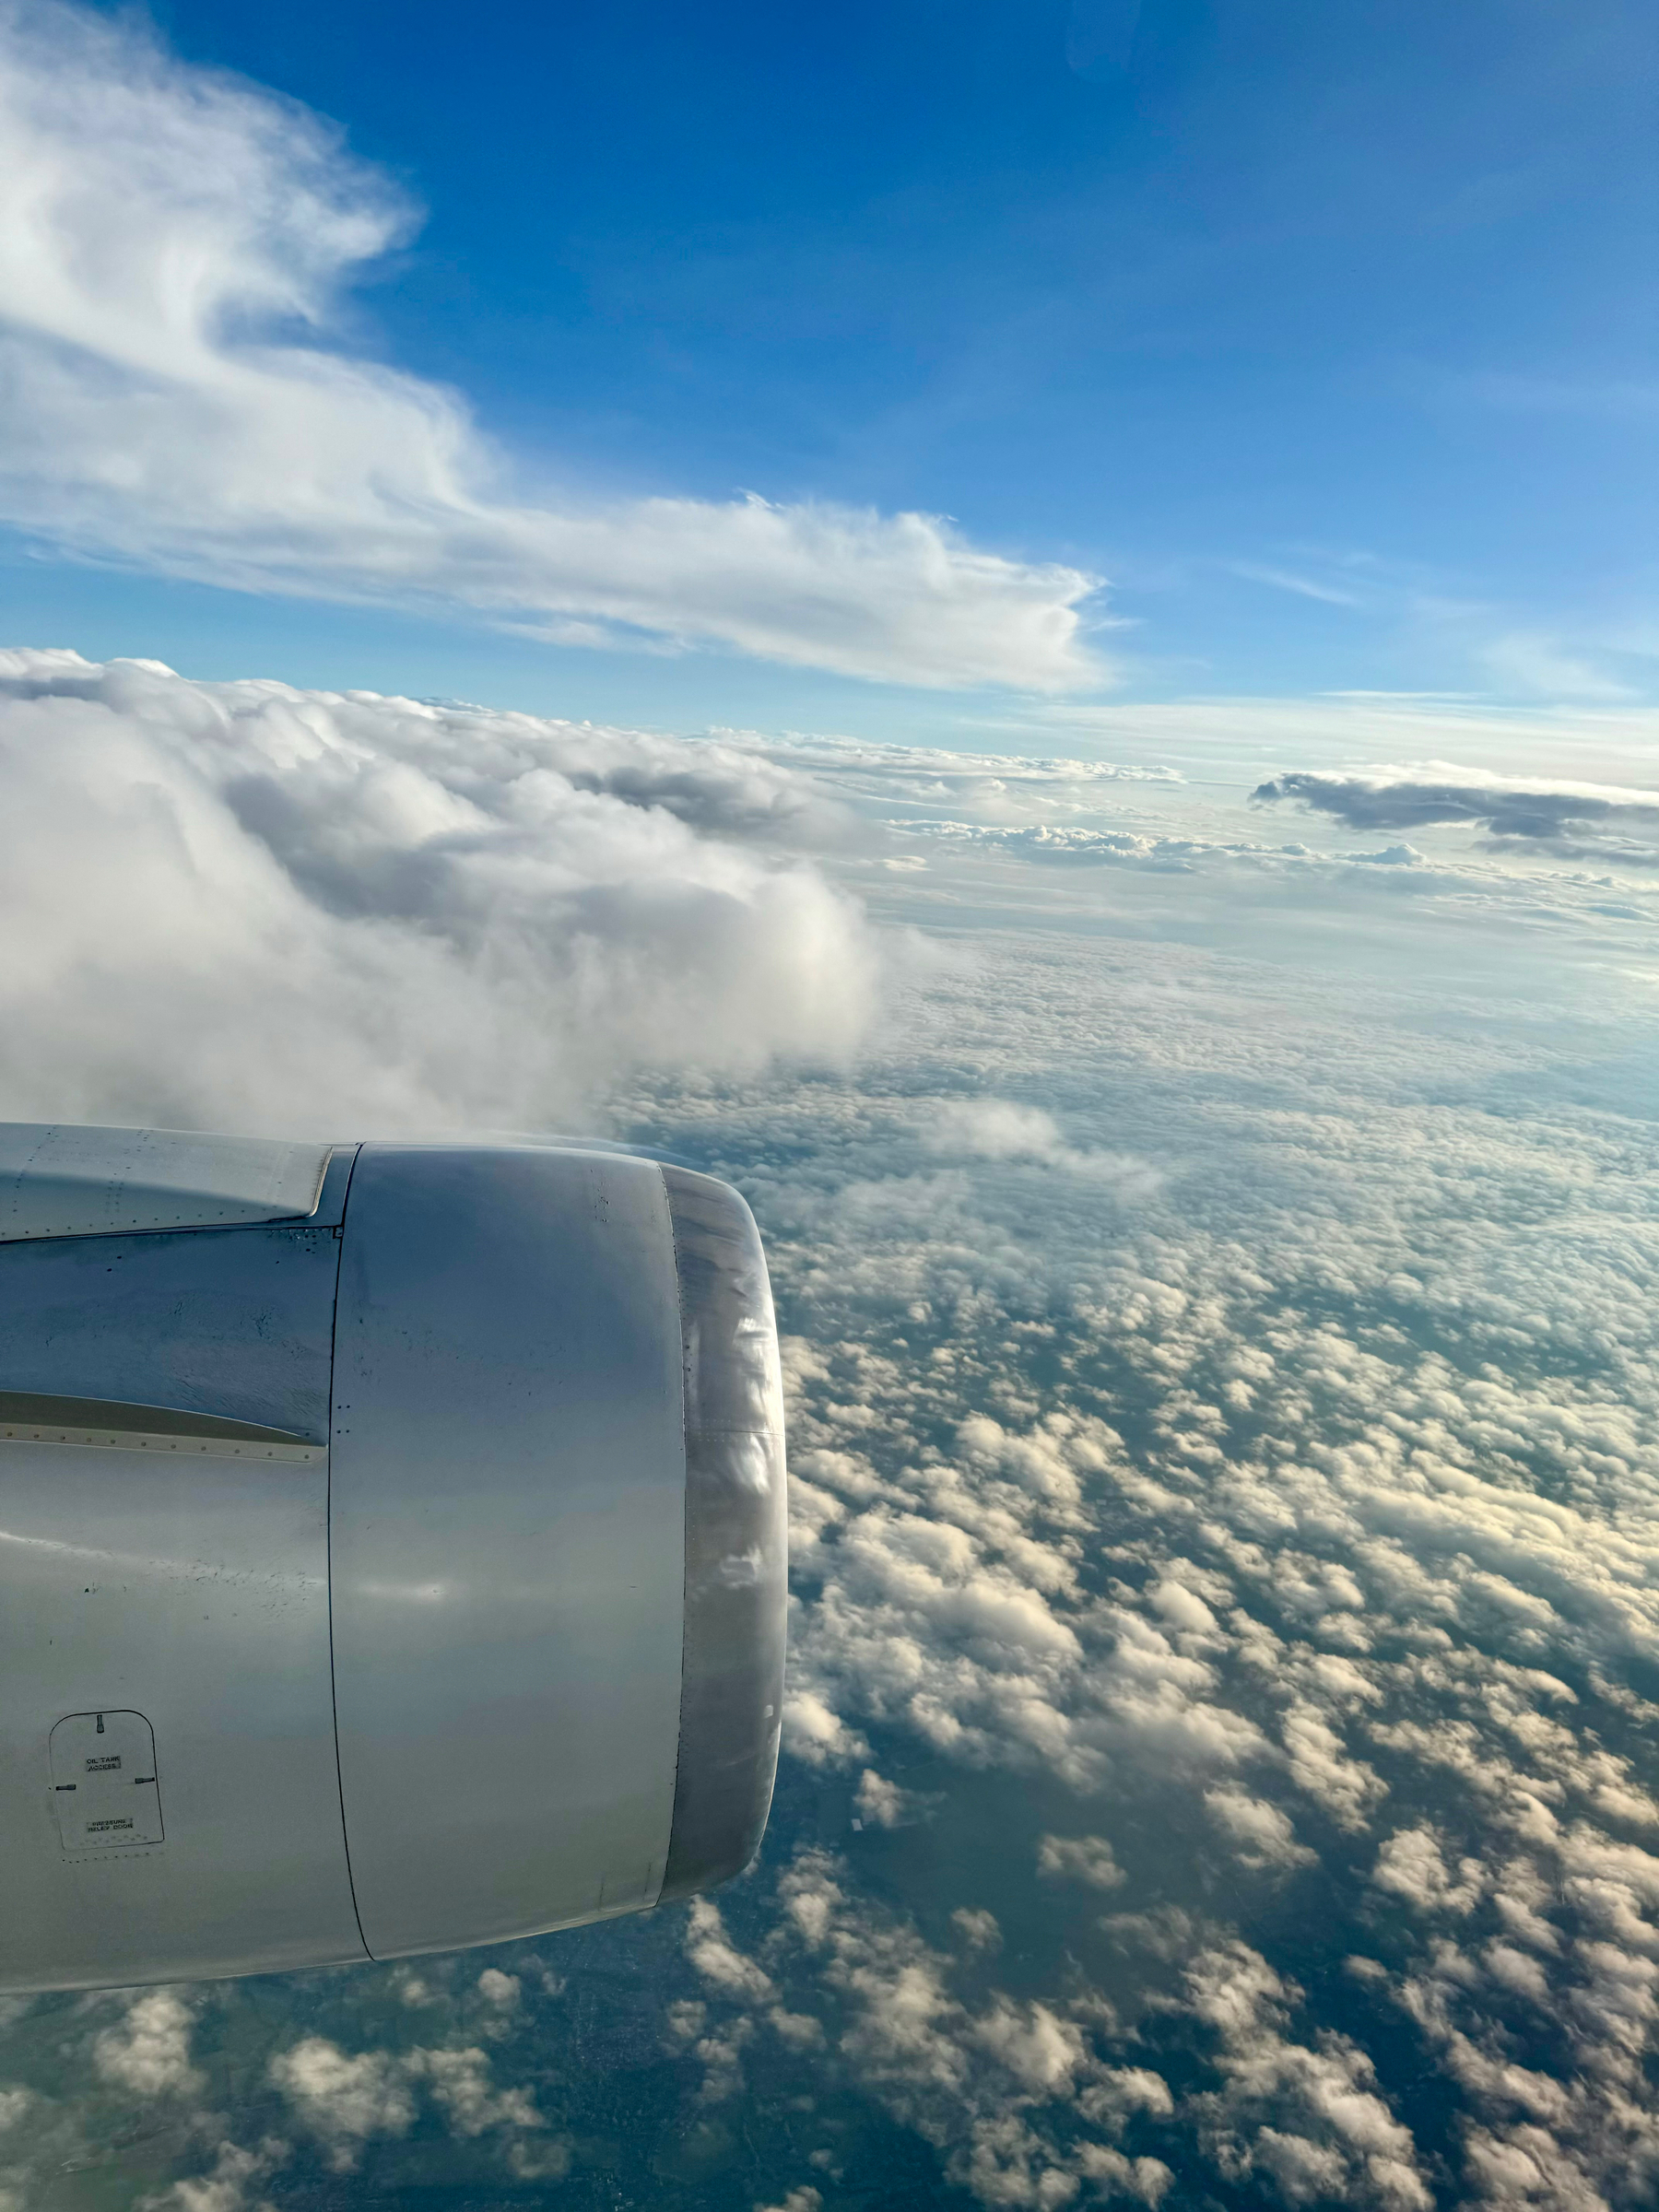 View from an airplane window showing the engine and wing over a seascape of clouds under a blue sky.